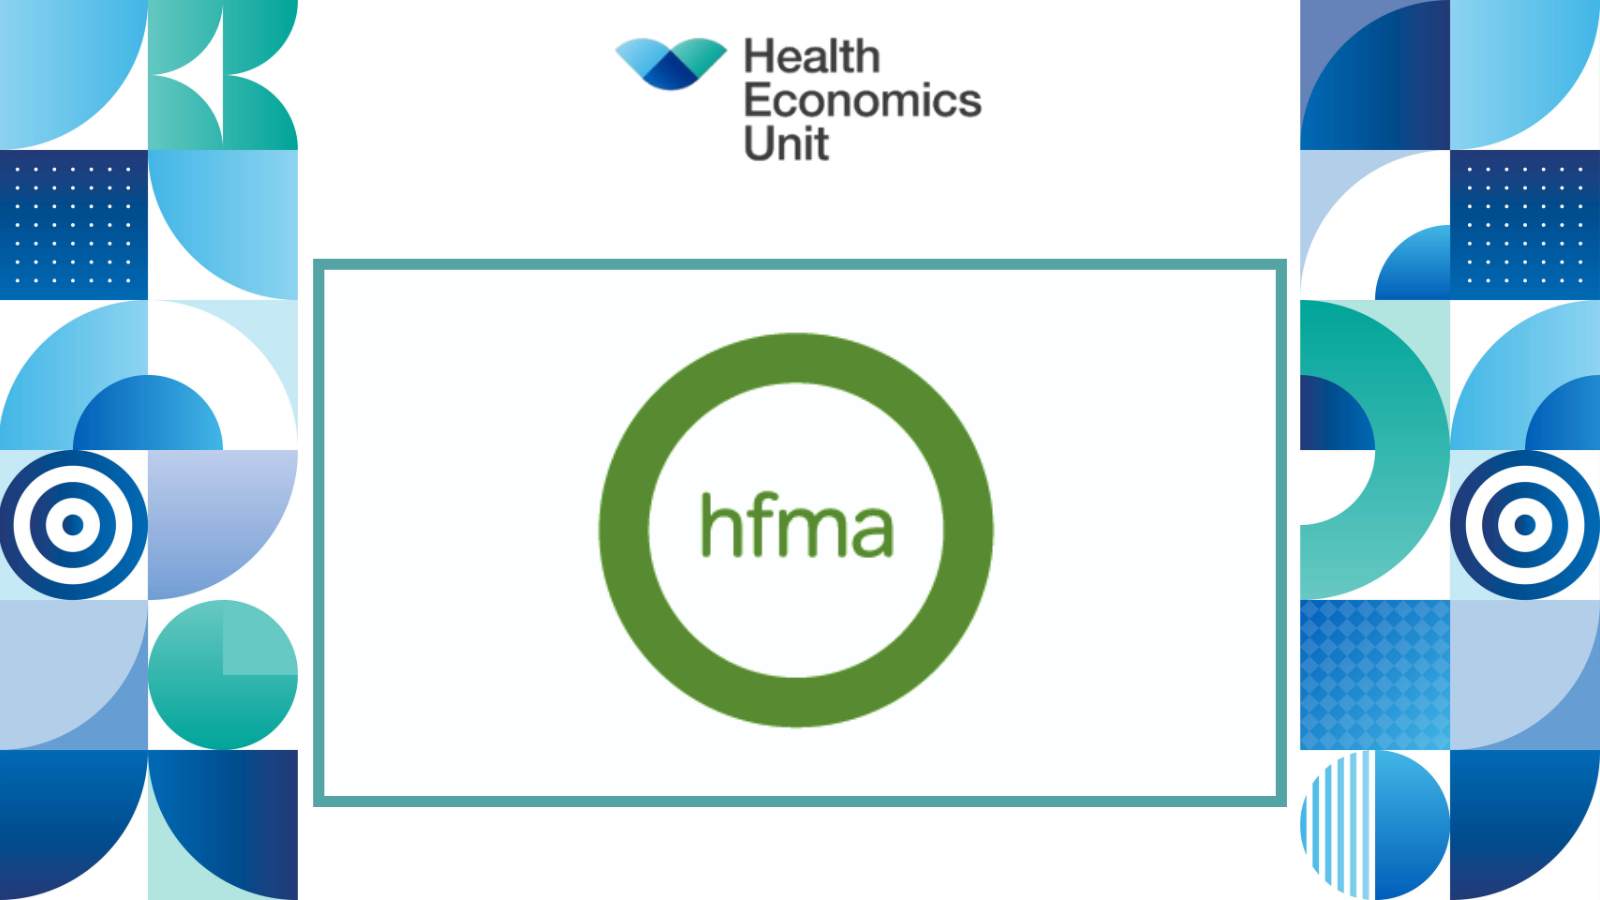 HFMA Events HEU_SoMe_cards